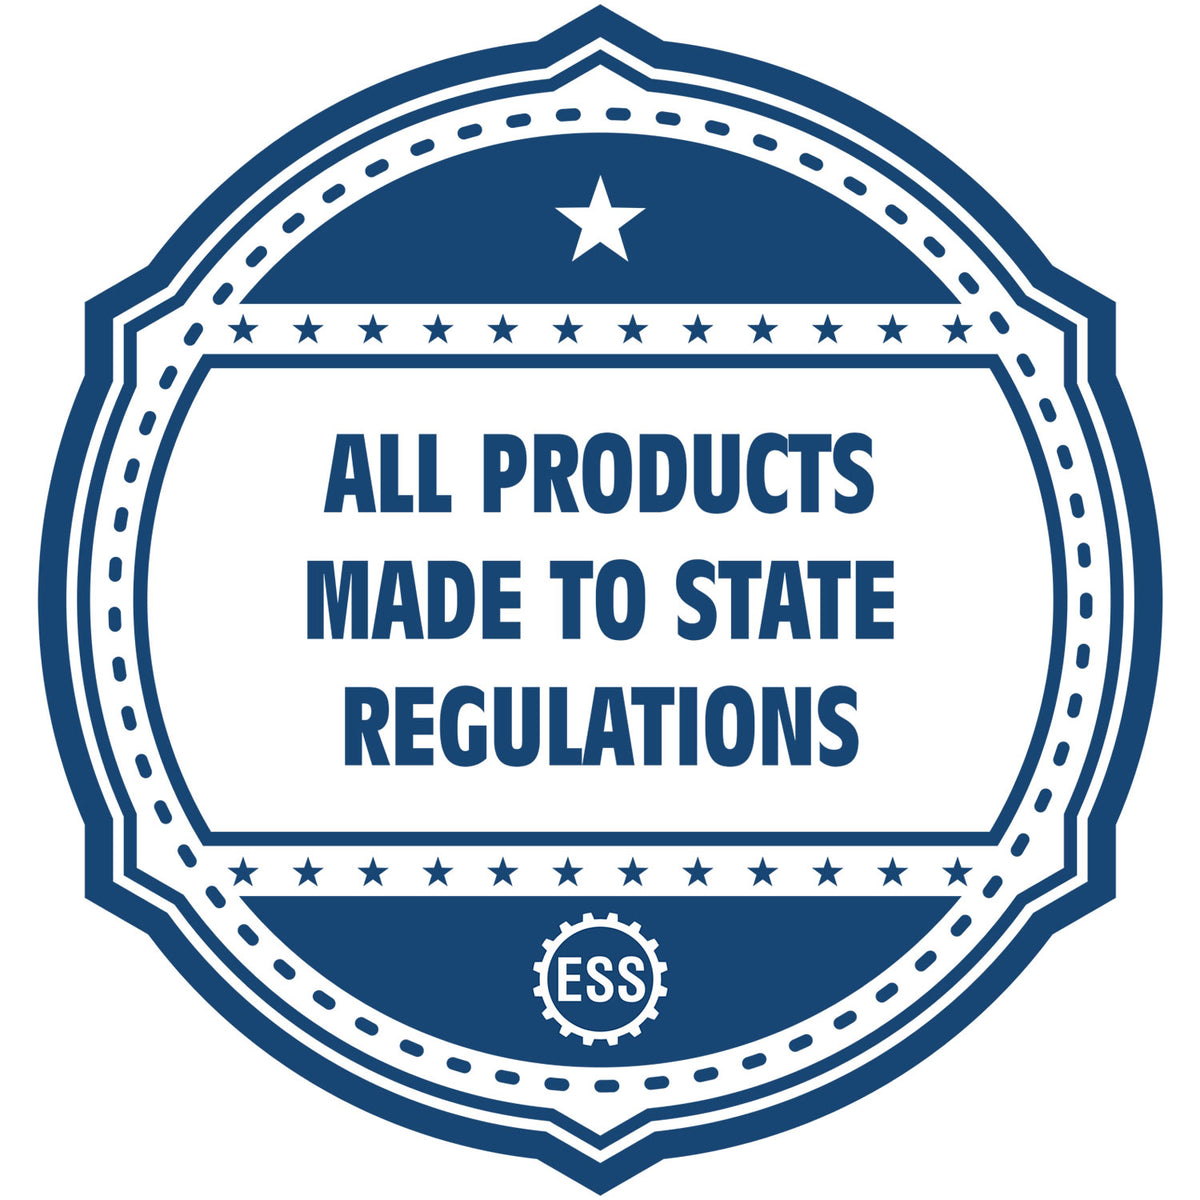 An icon or badge element for the Soft Kansas Professional Engineer Seal showing that this product is made in compliance with state regulations.